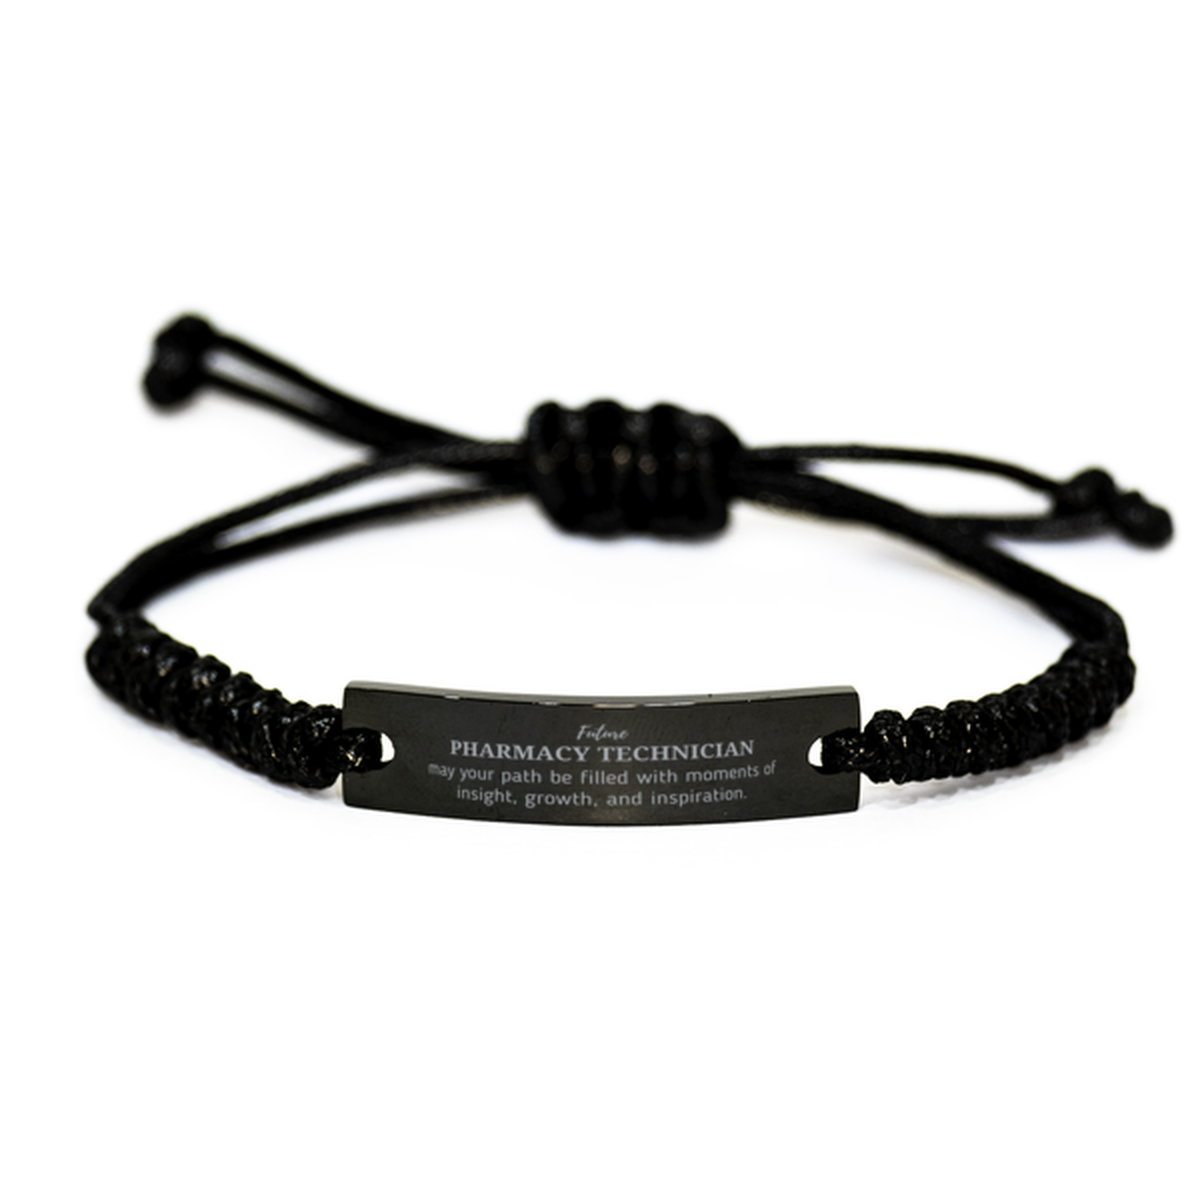 Future Pharmacy Technician Gifts, May your path be filled with moments of insight, Graduation Gifts for New Pharmacy Technician, Christmas Unique Black Rope Bracelet For Men, Women, Friends